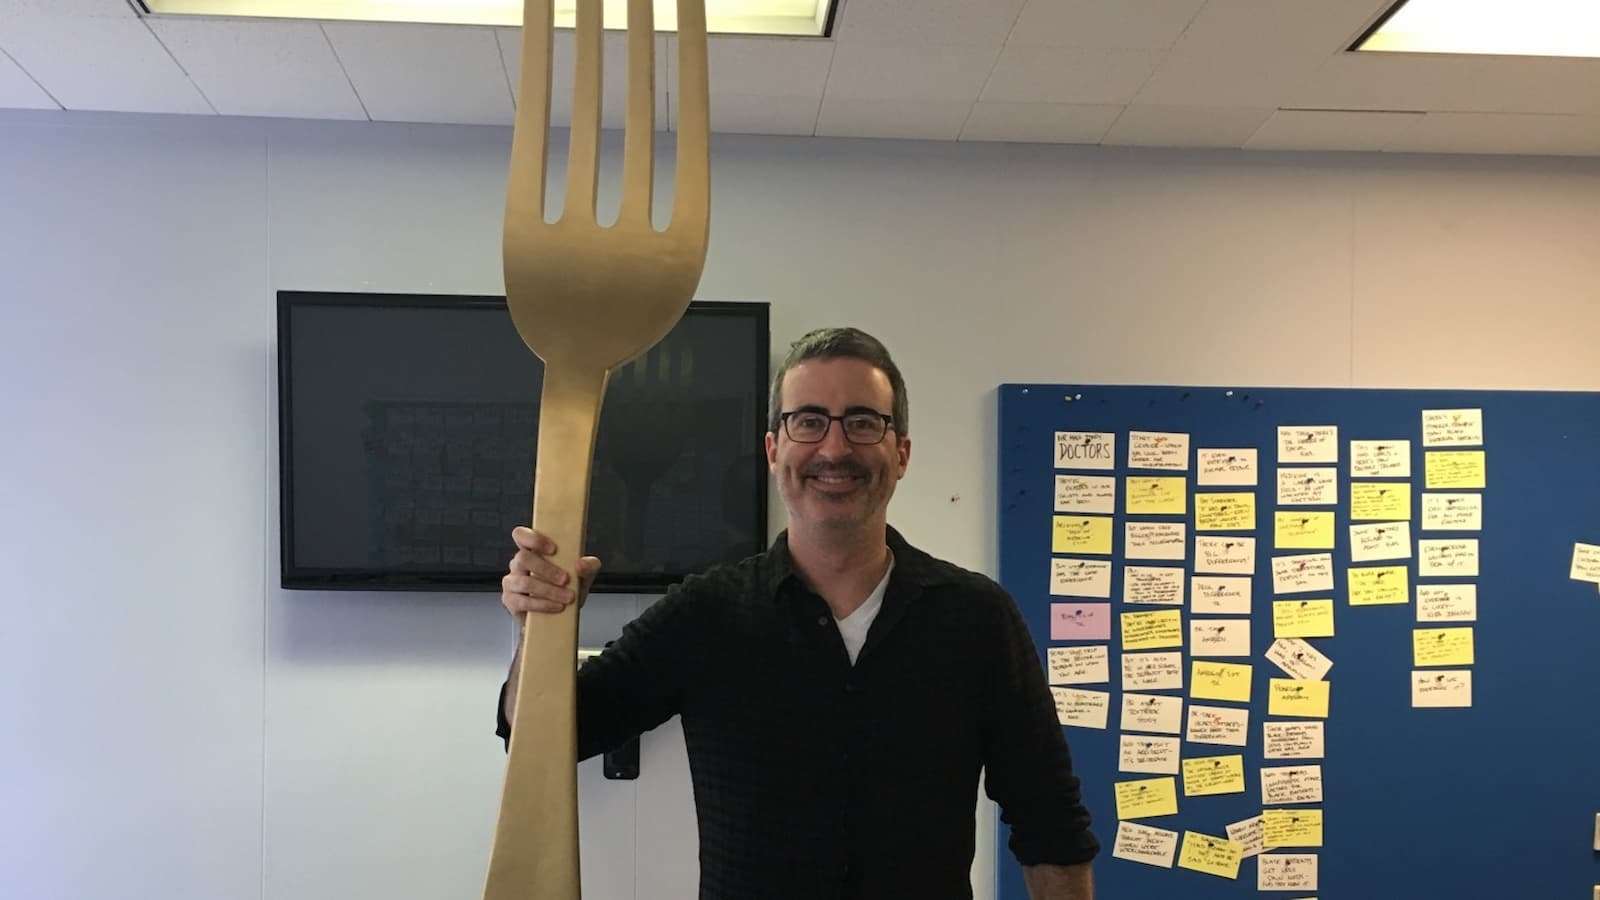 A photo of John Oliver